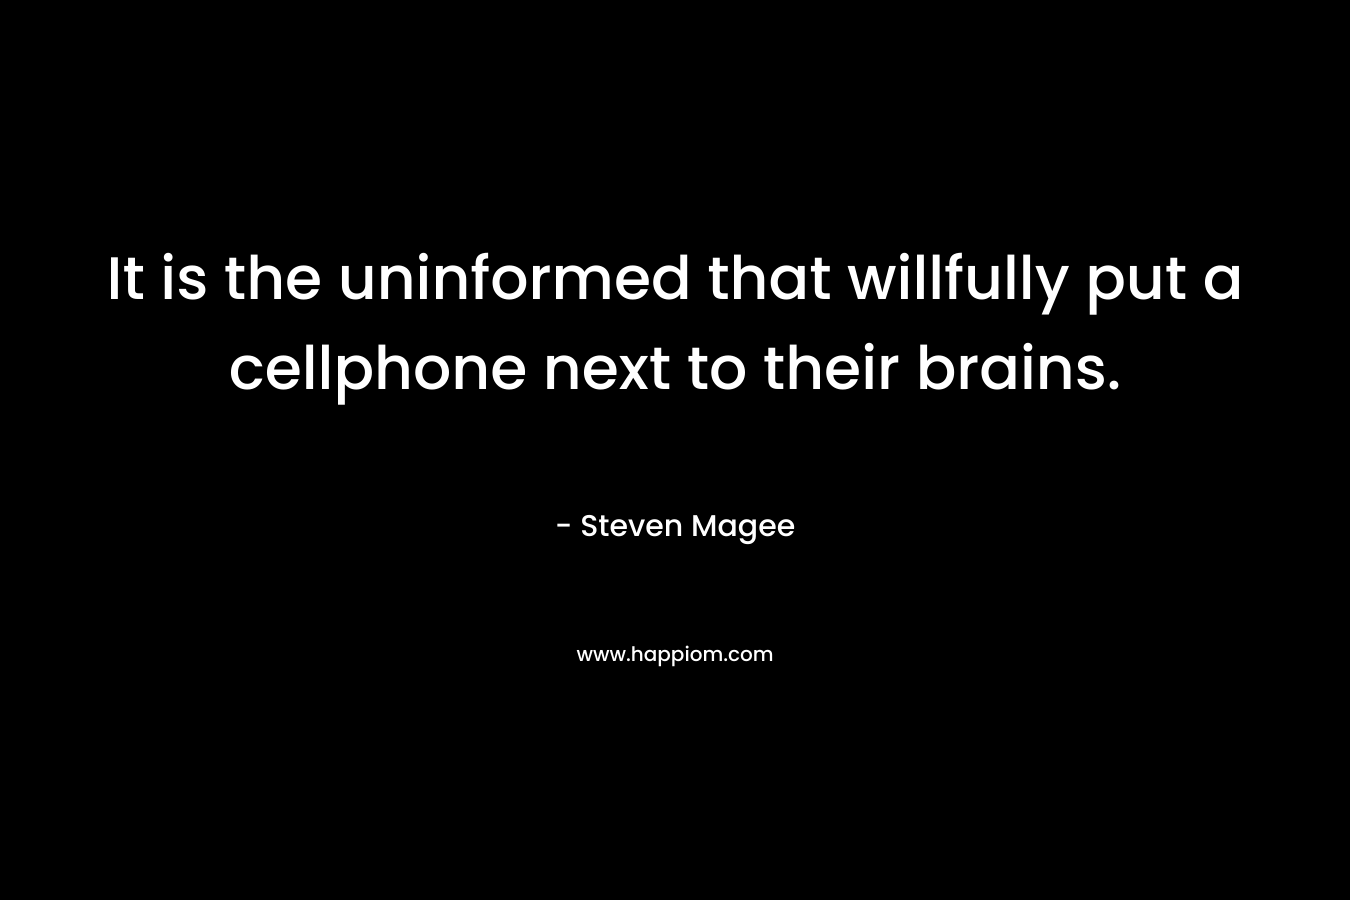 It is the uninformed that willfully put a cellphone next to their brains. – Steven Magee